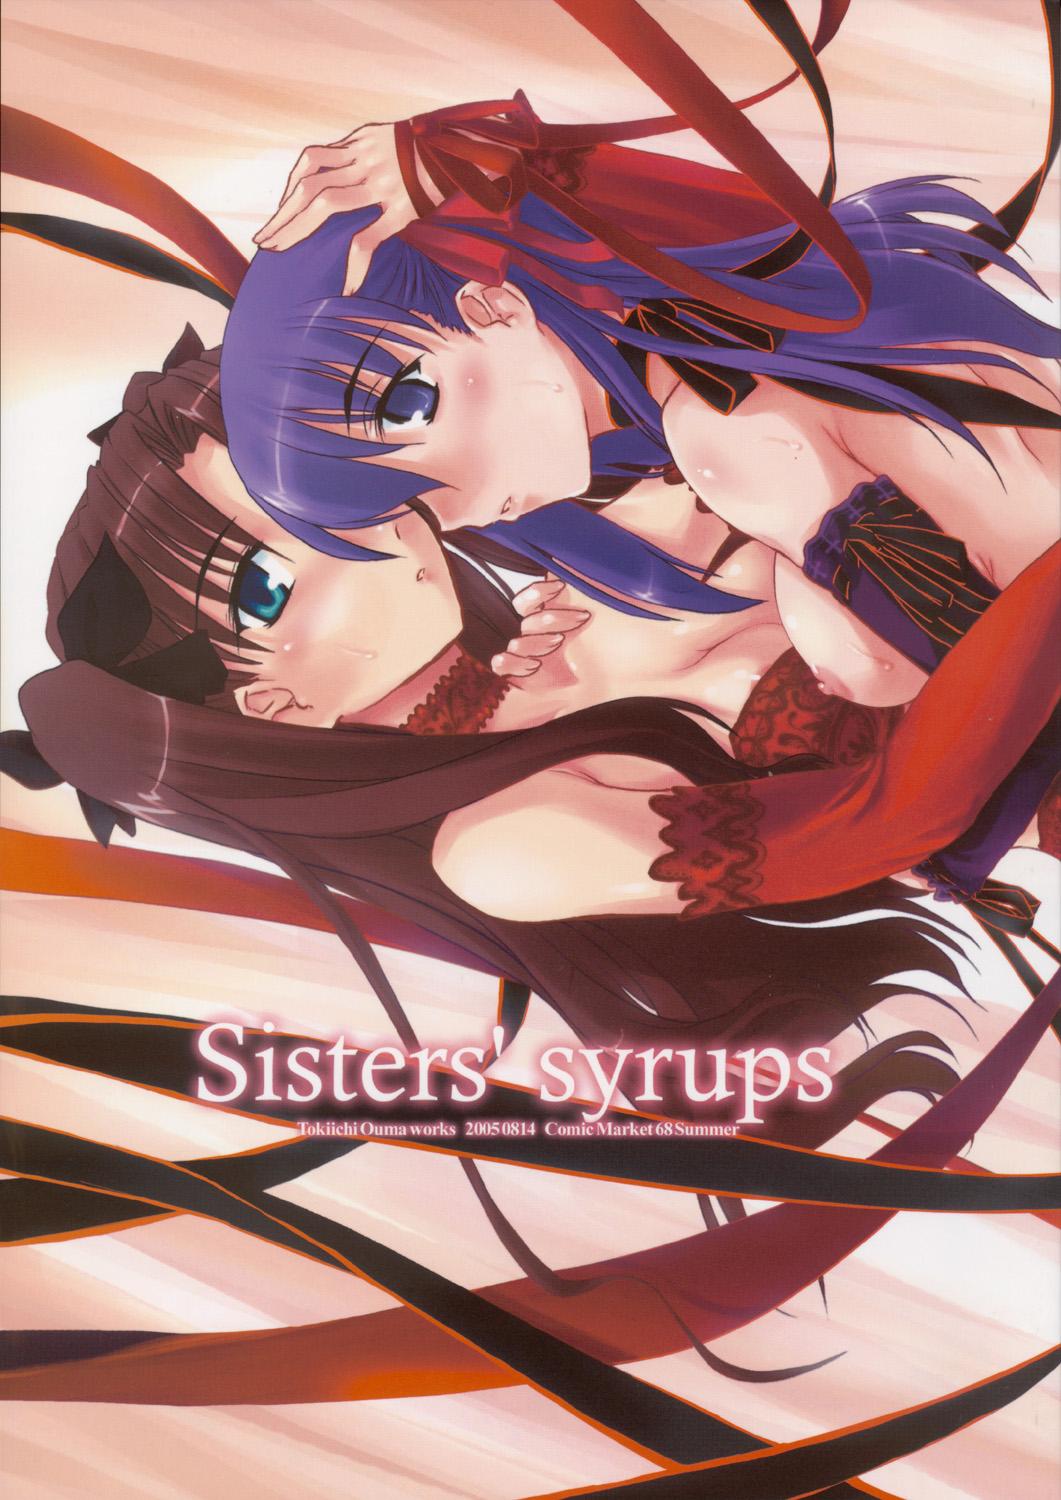 Mamada Sisters' Syrups - Fate stay night Nude - Picture 1